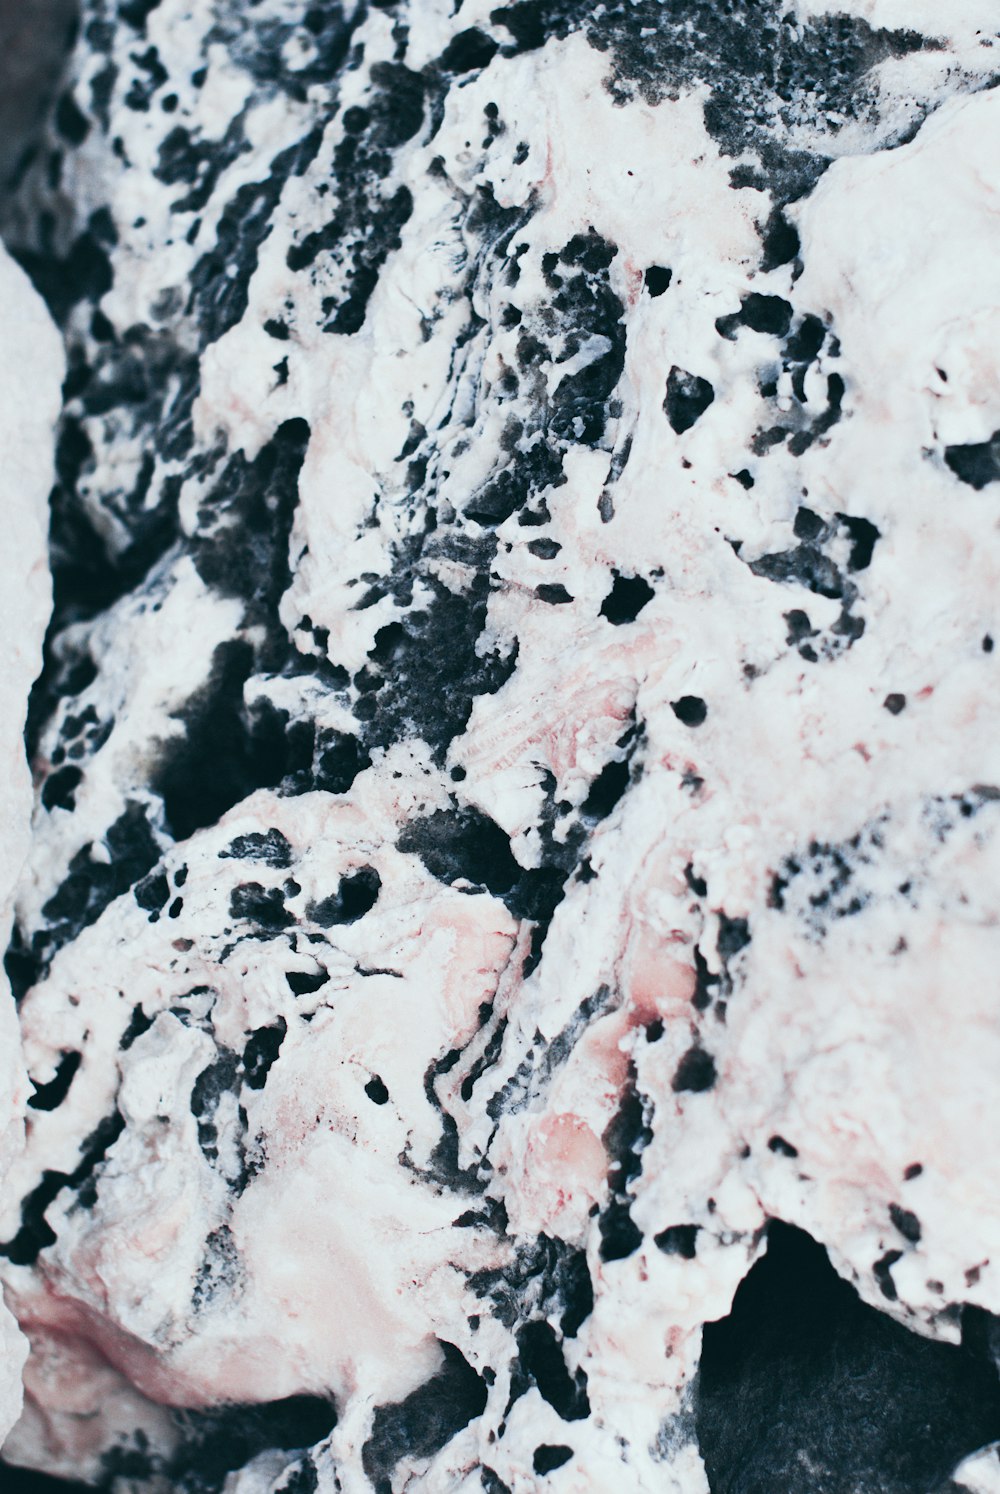 a close up of a black and white substance